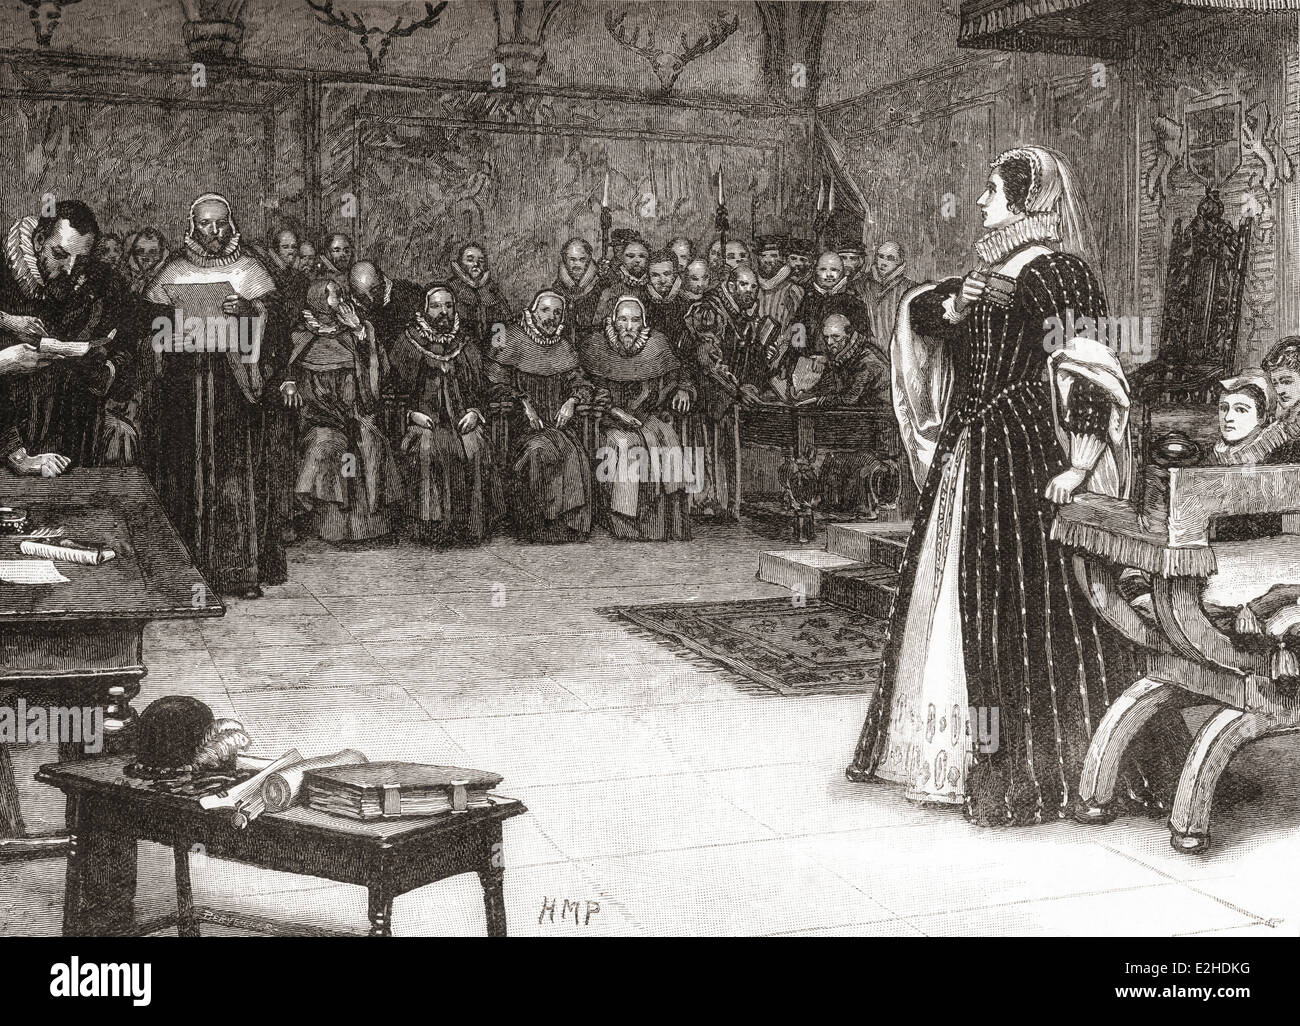 The trial of Mary Queen of Scots in Fotheringhay Castle, Northamptonshire, England, 1586. Stock Photo